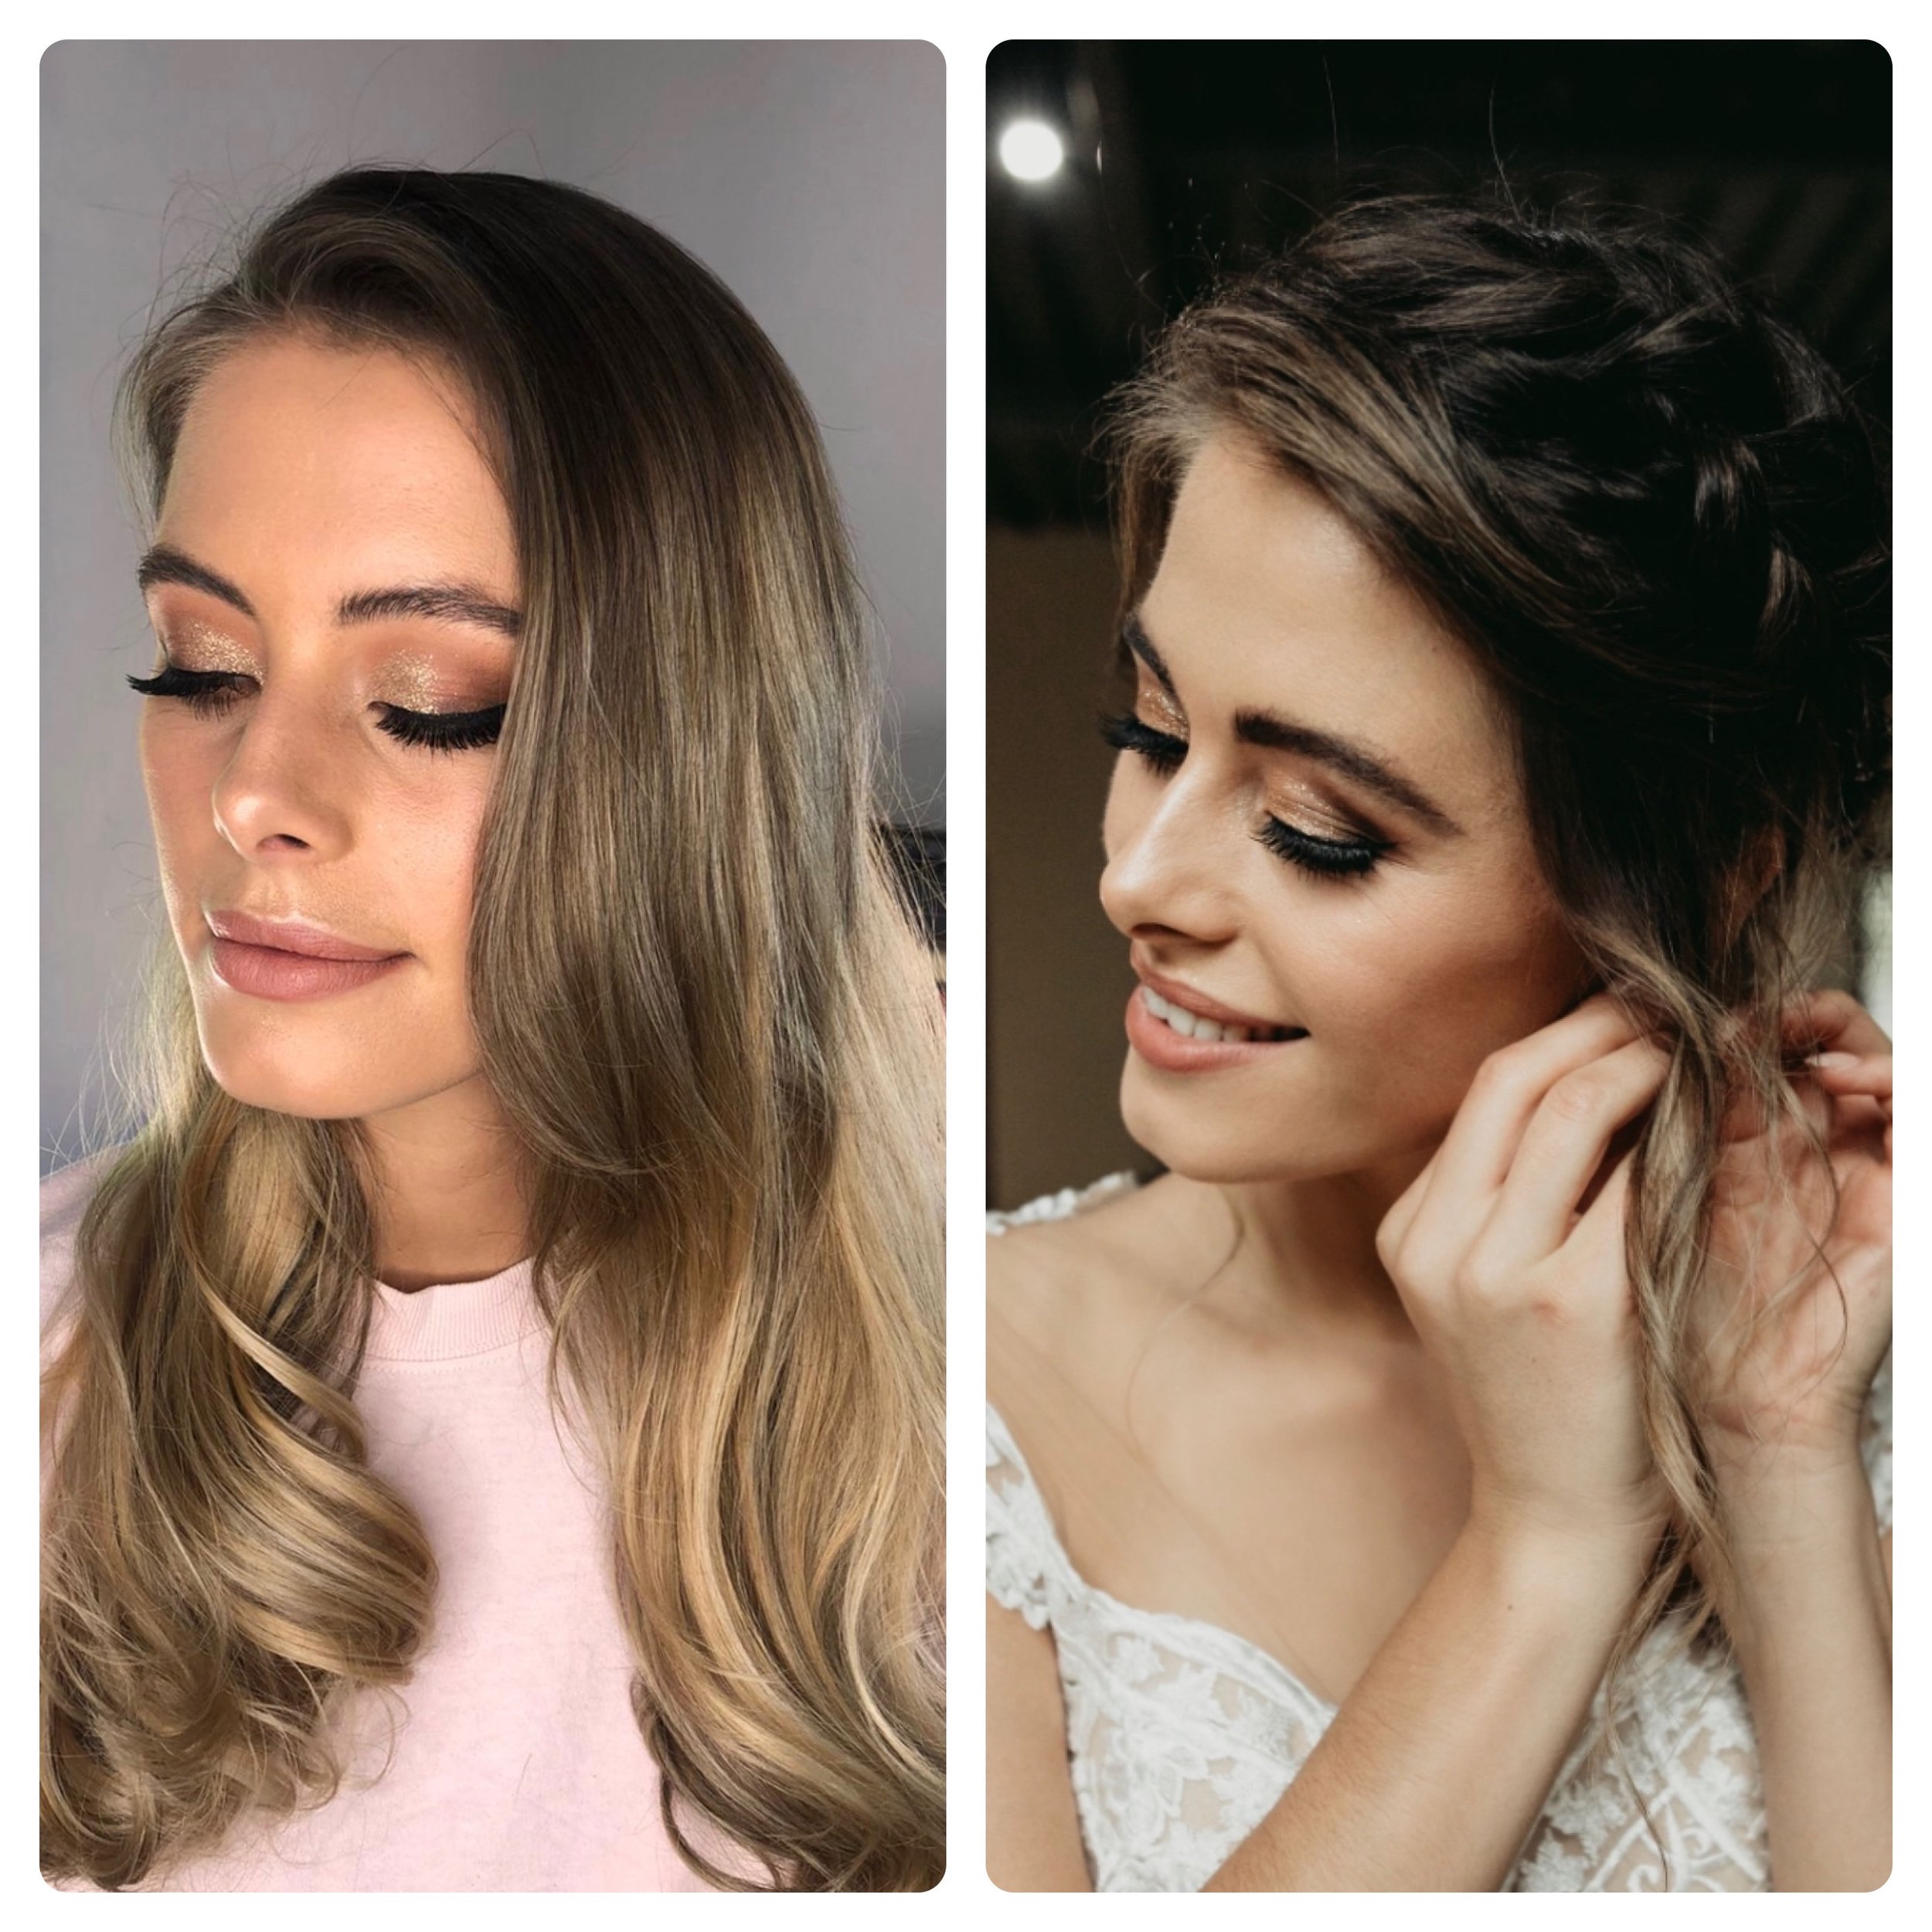 Bridal makeup trial do's and don'ts — Makeup Artist and Hairstylist